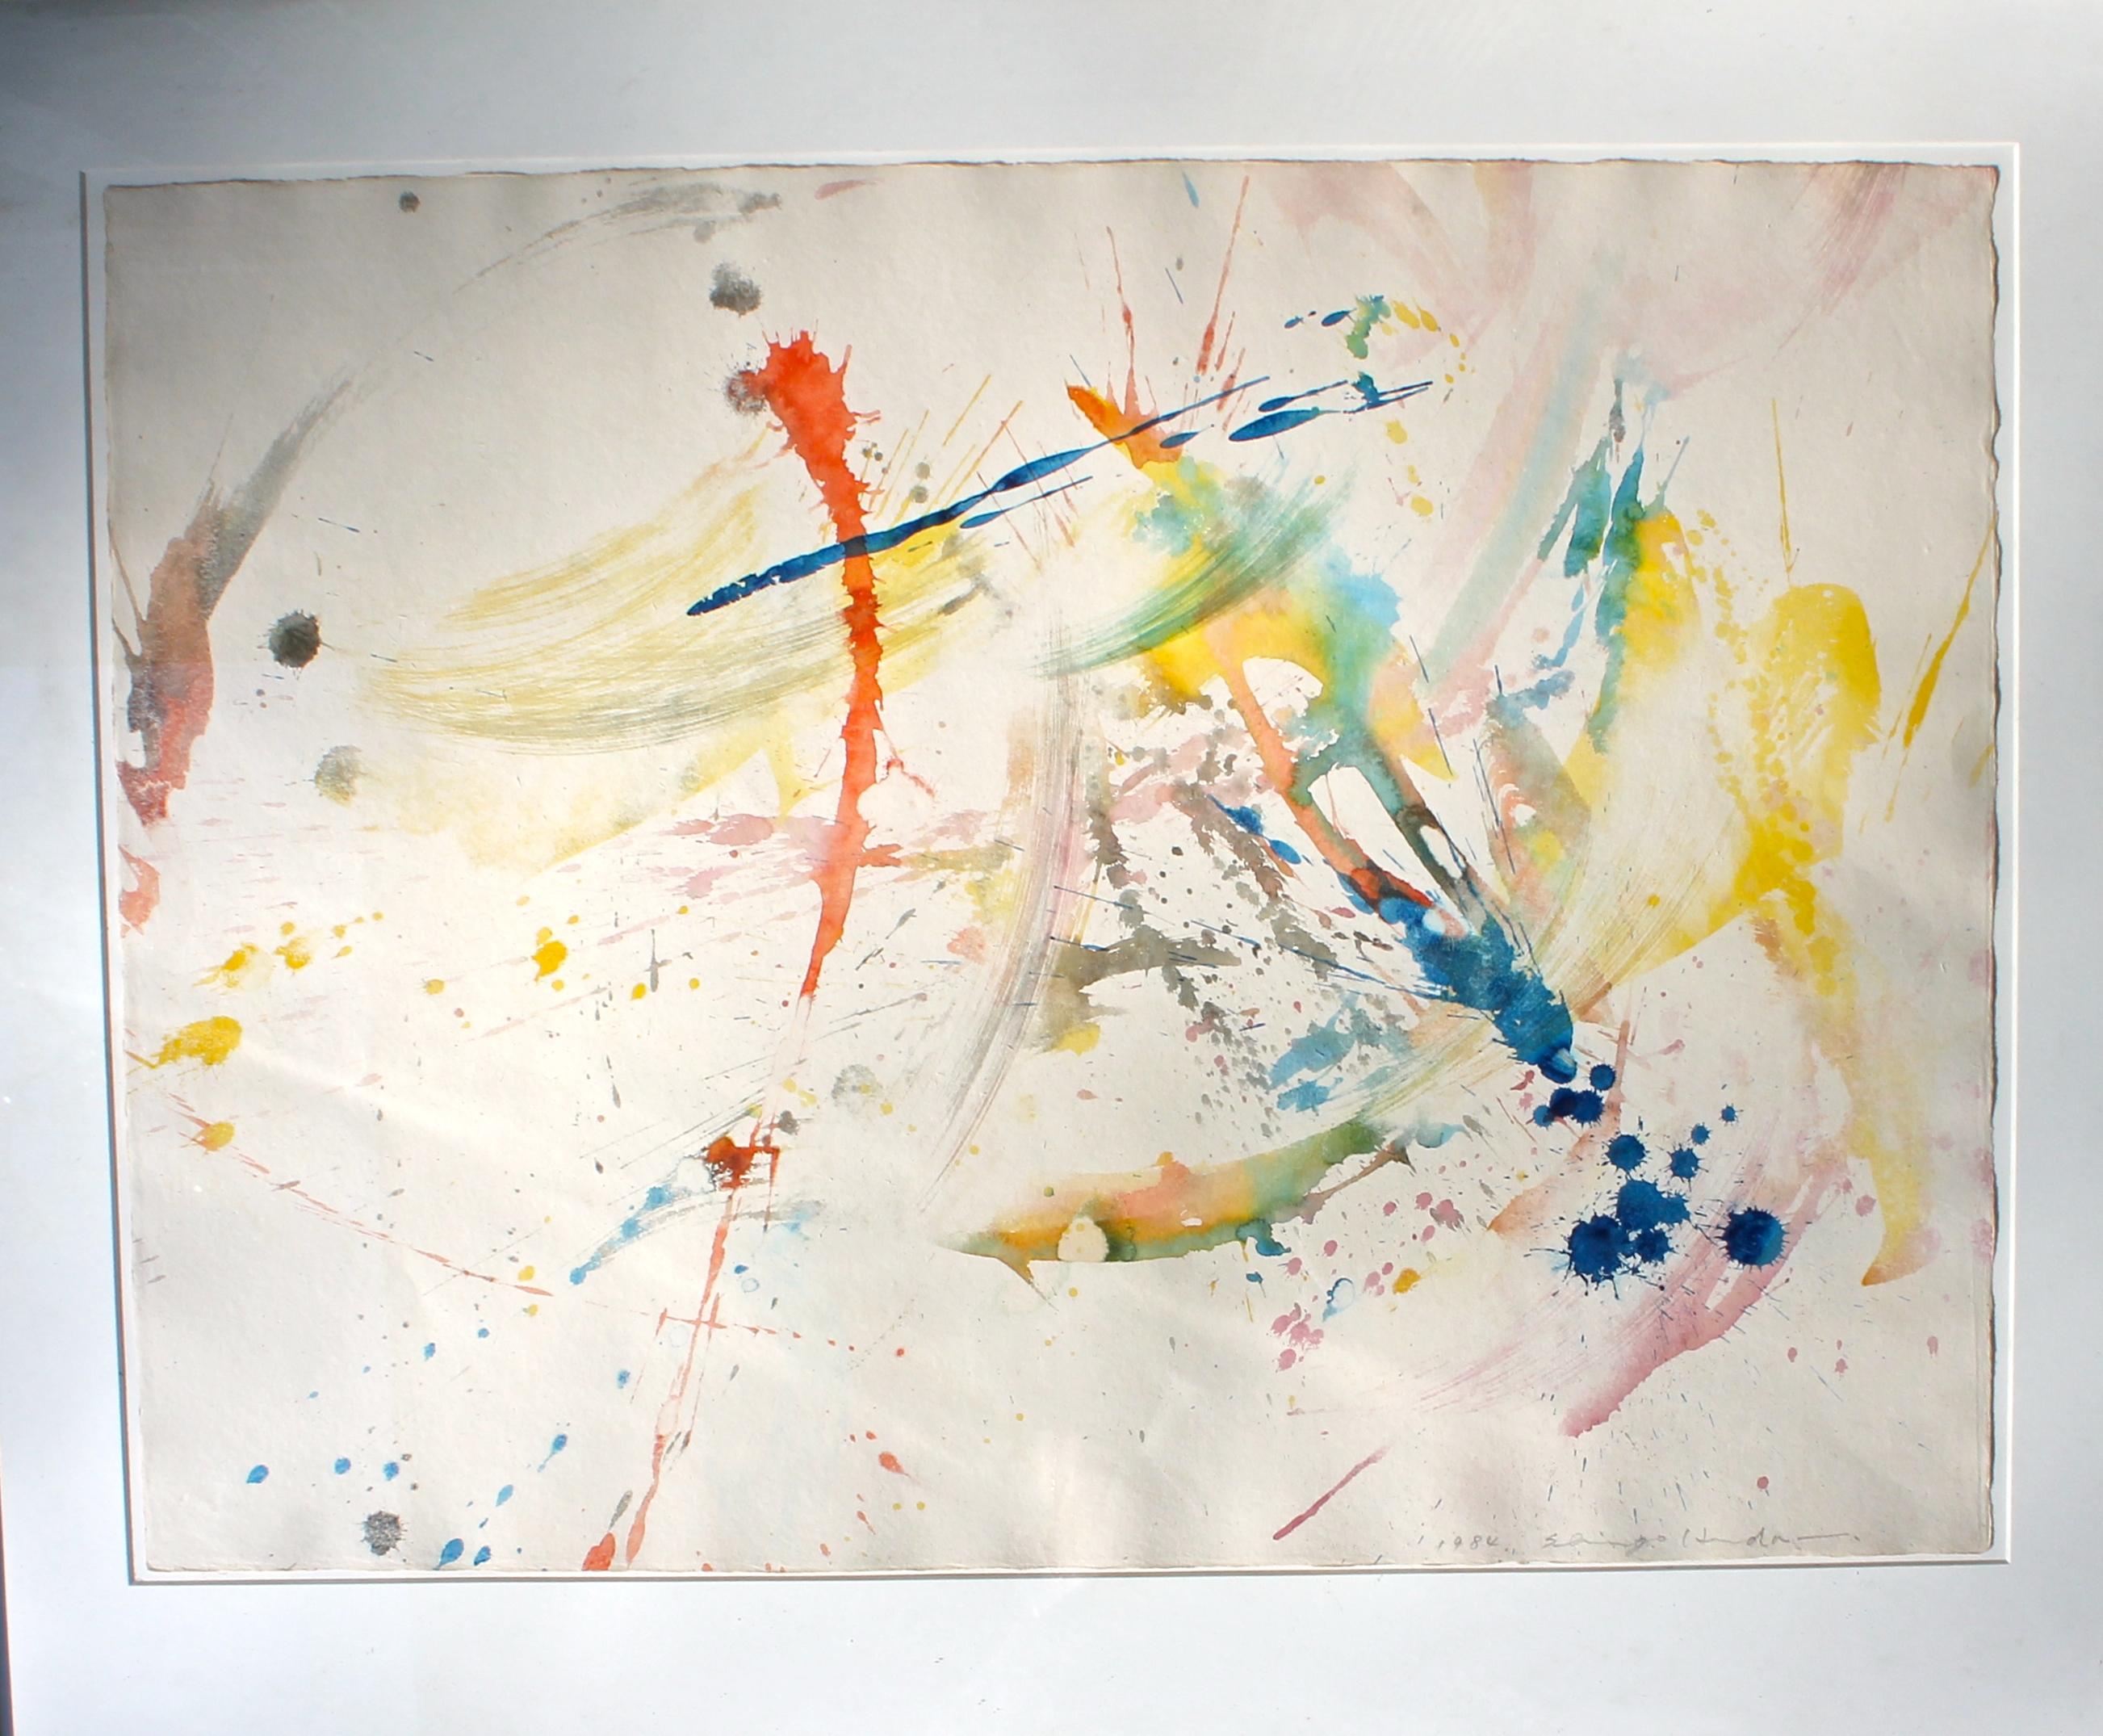 Modern Shingo Honda  'To White Space' Series Abstract Expressionist Watercolor For Sale